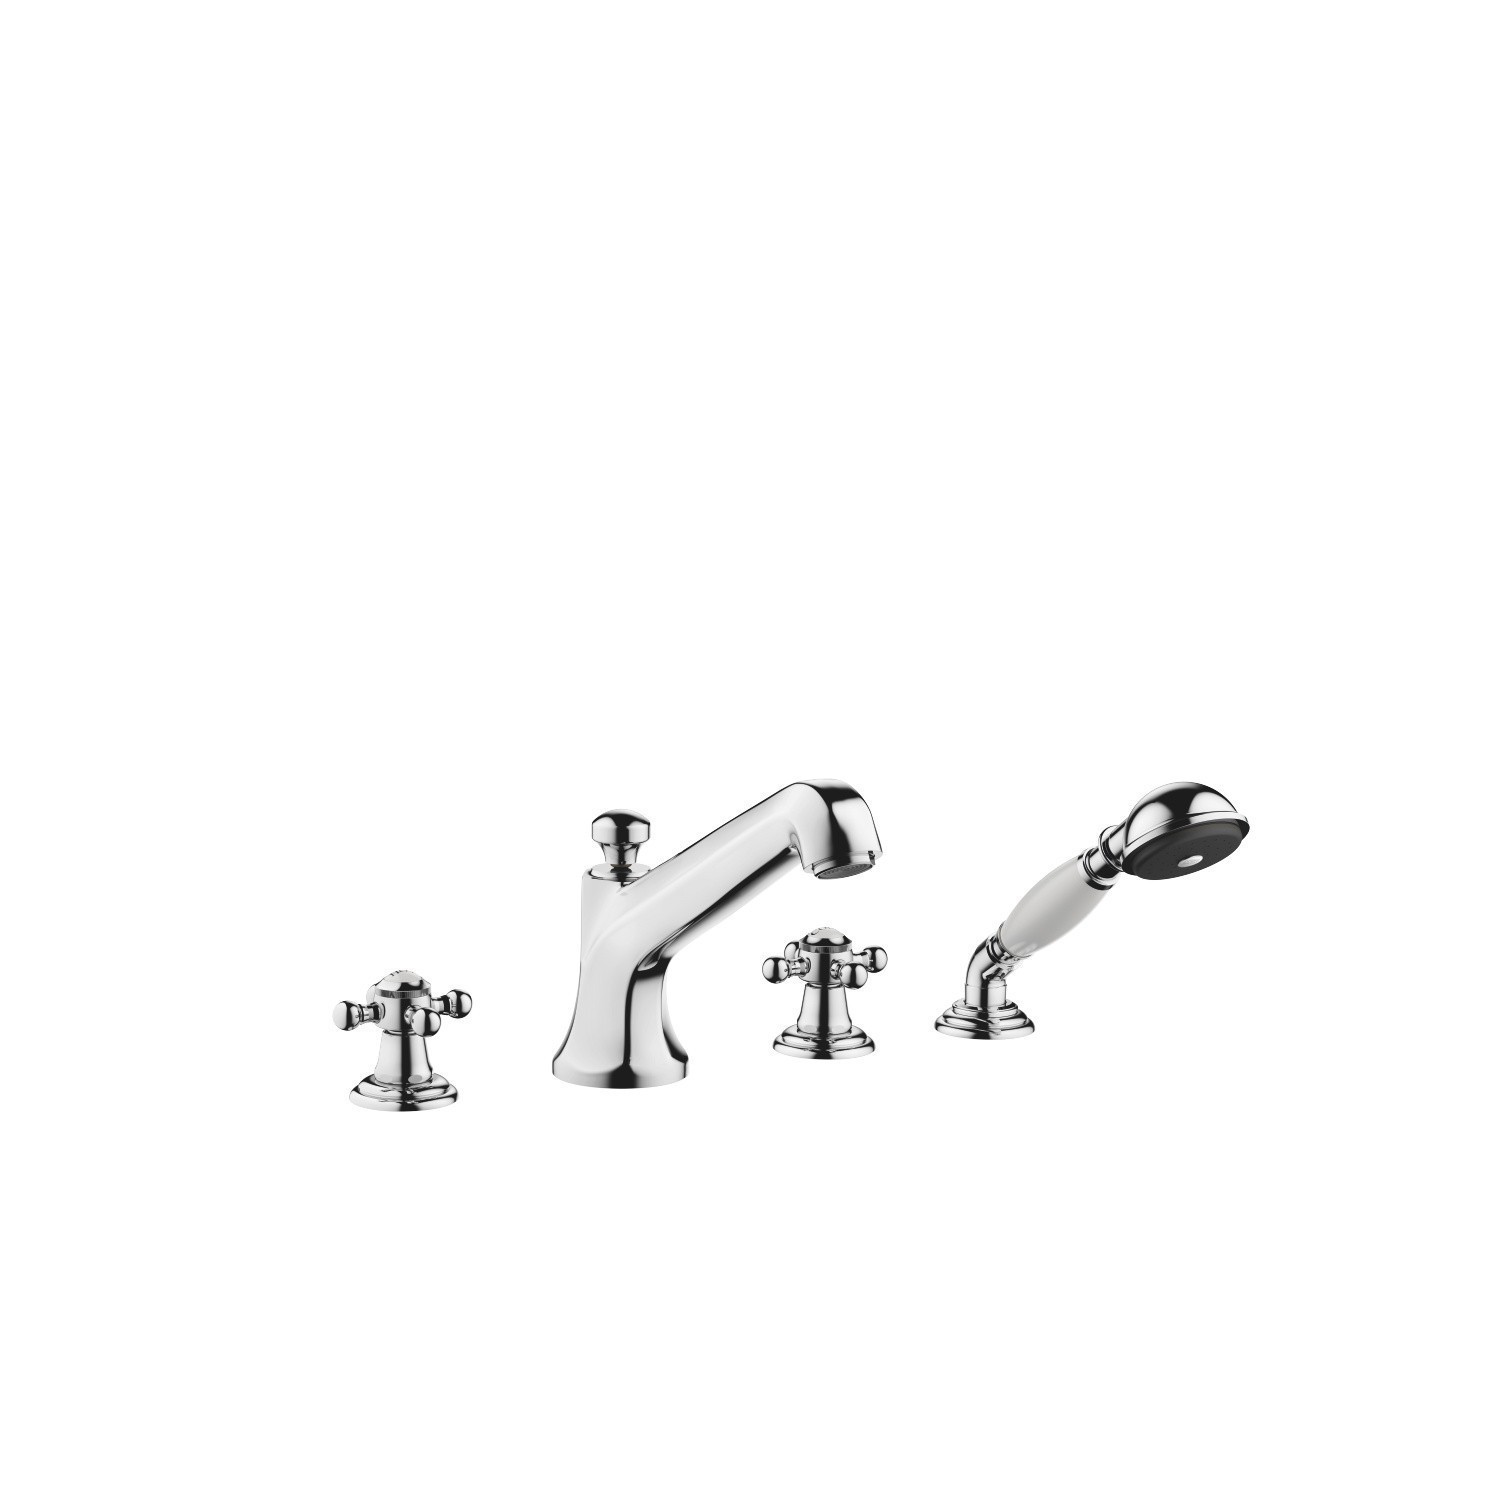 DORNBRACHT 27502360 MADISON FOUR HOLES WIDESPREAD DECK MOUNT TUB FILLER WITH HAND SHOWER AND CROSS HANDLES